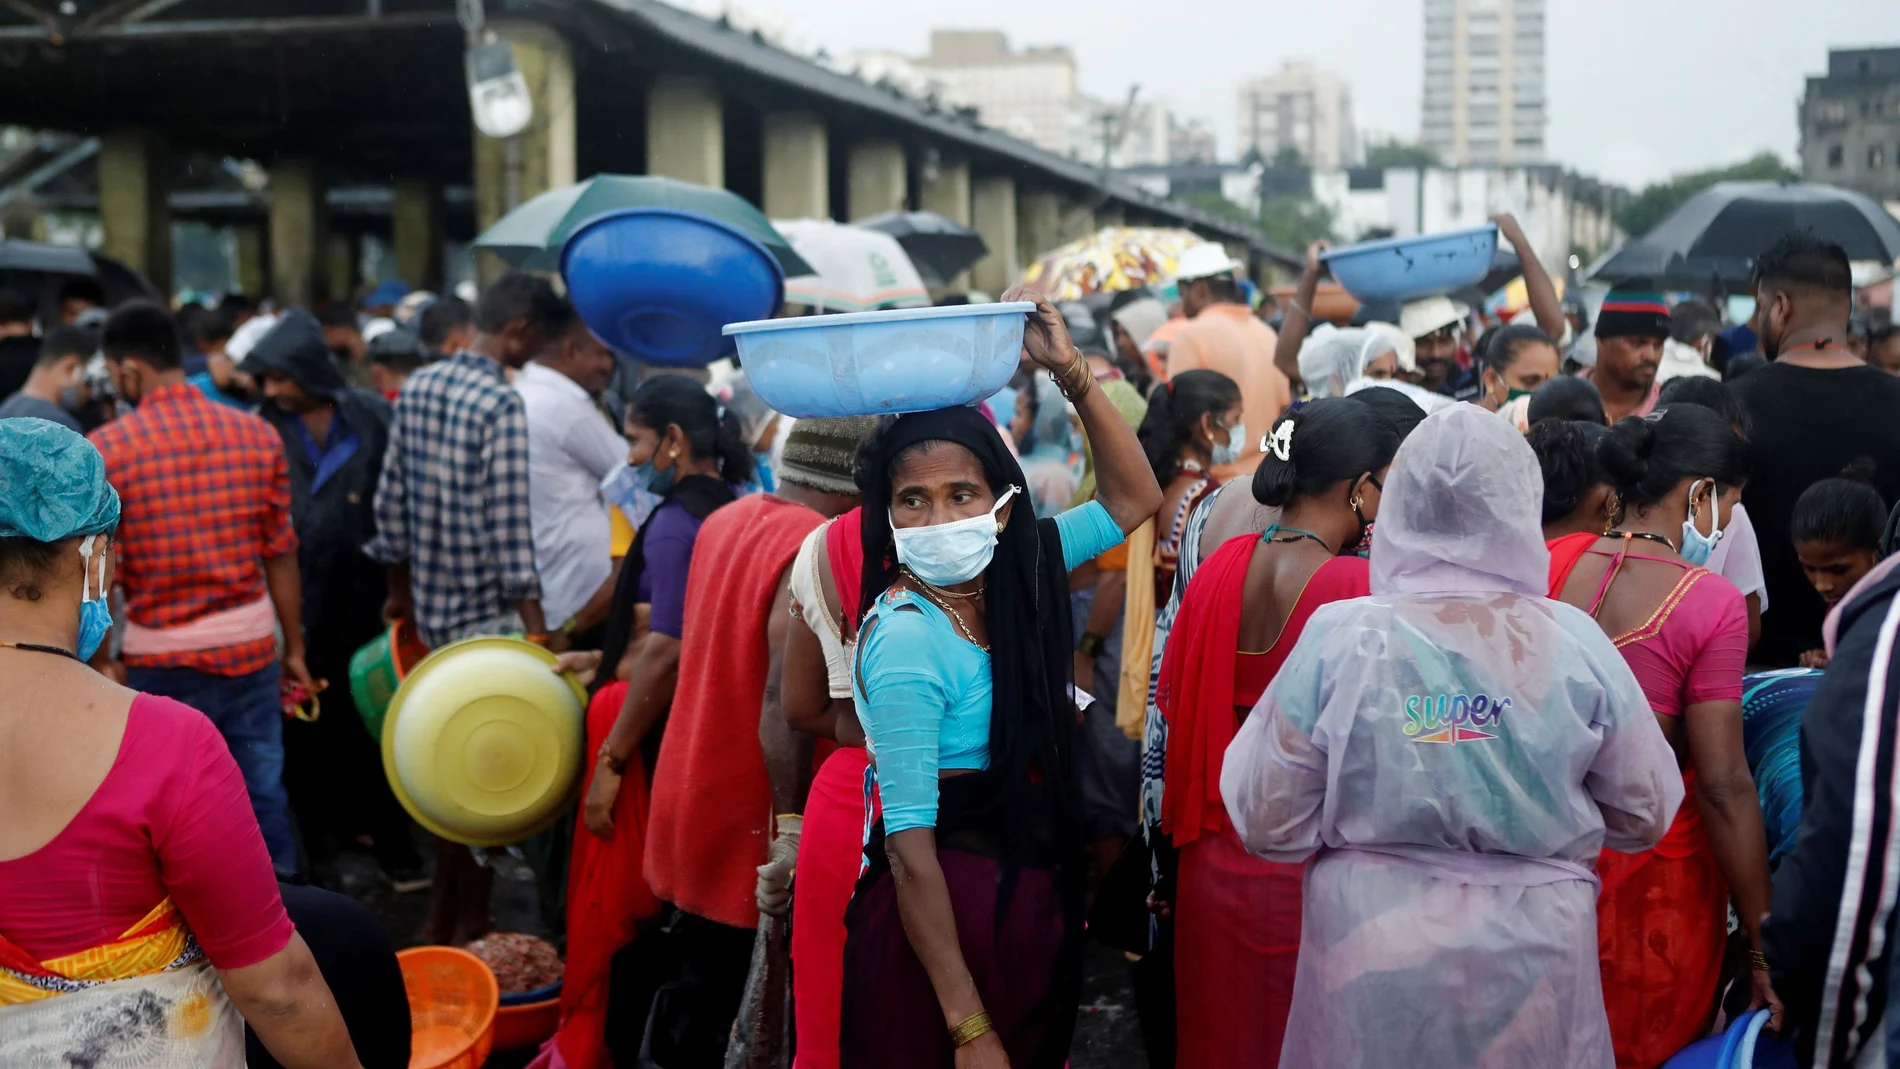 A fisherwoman wearing a protective mask is seen at a fish market amidst the spread of the coronavirus disease (COVID-19) in Mumbai